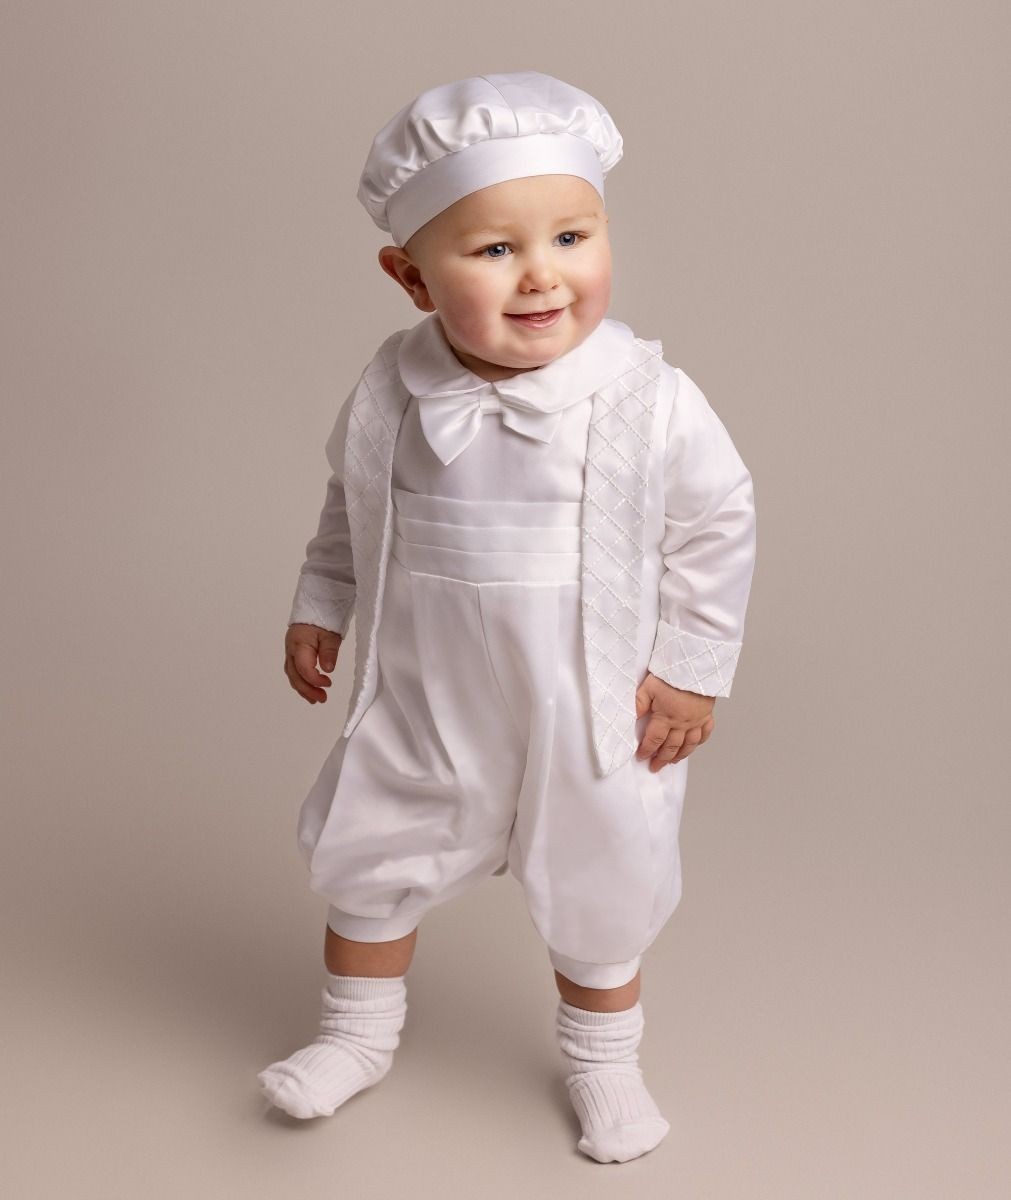 Baby Boys White Christening Outfit Set - LIAM